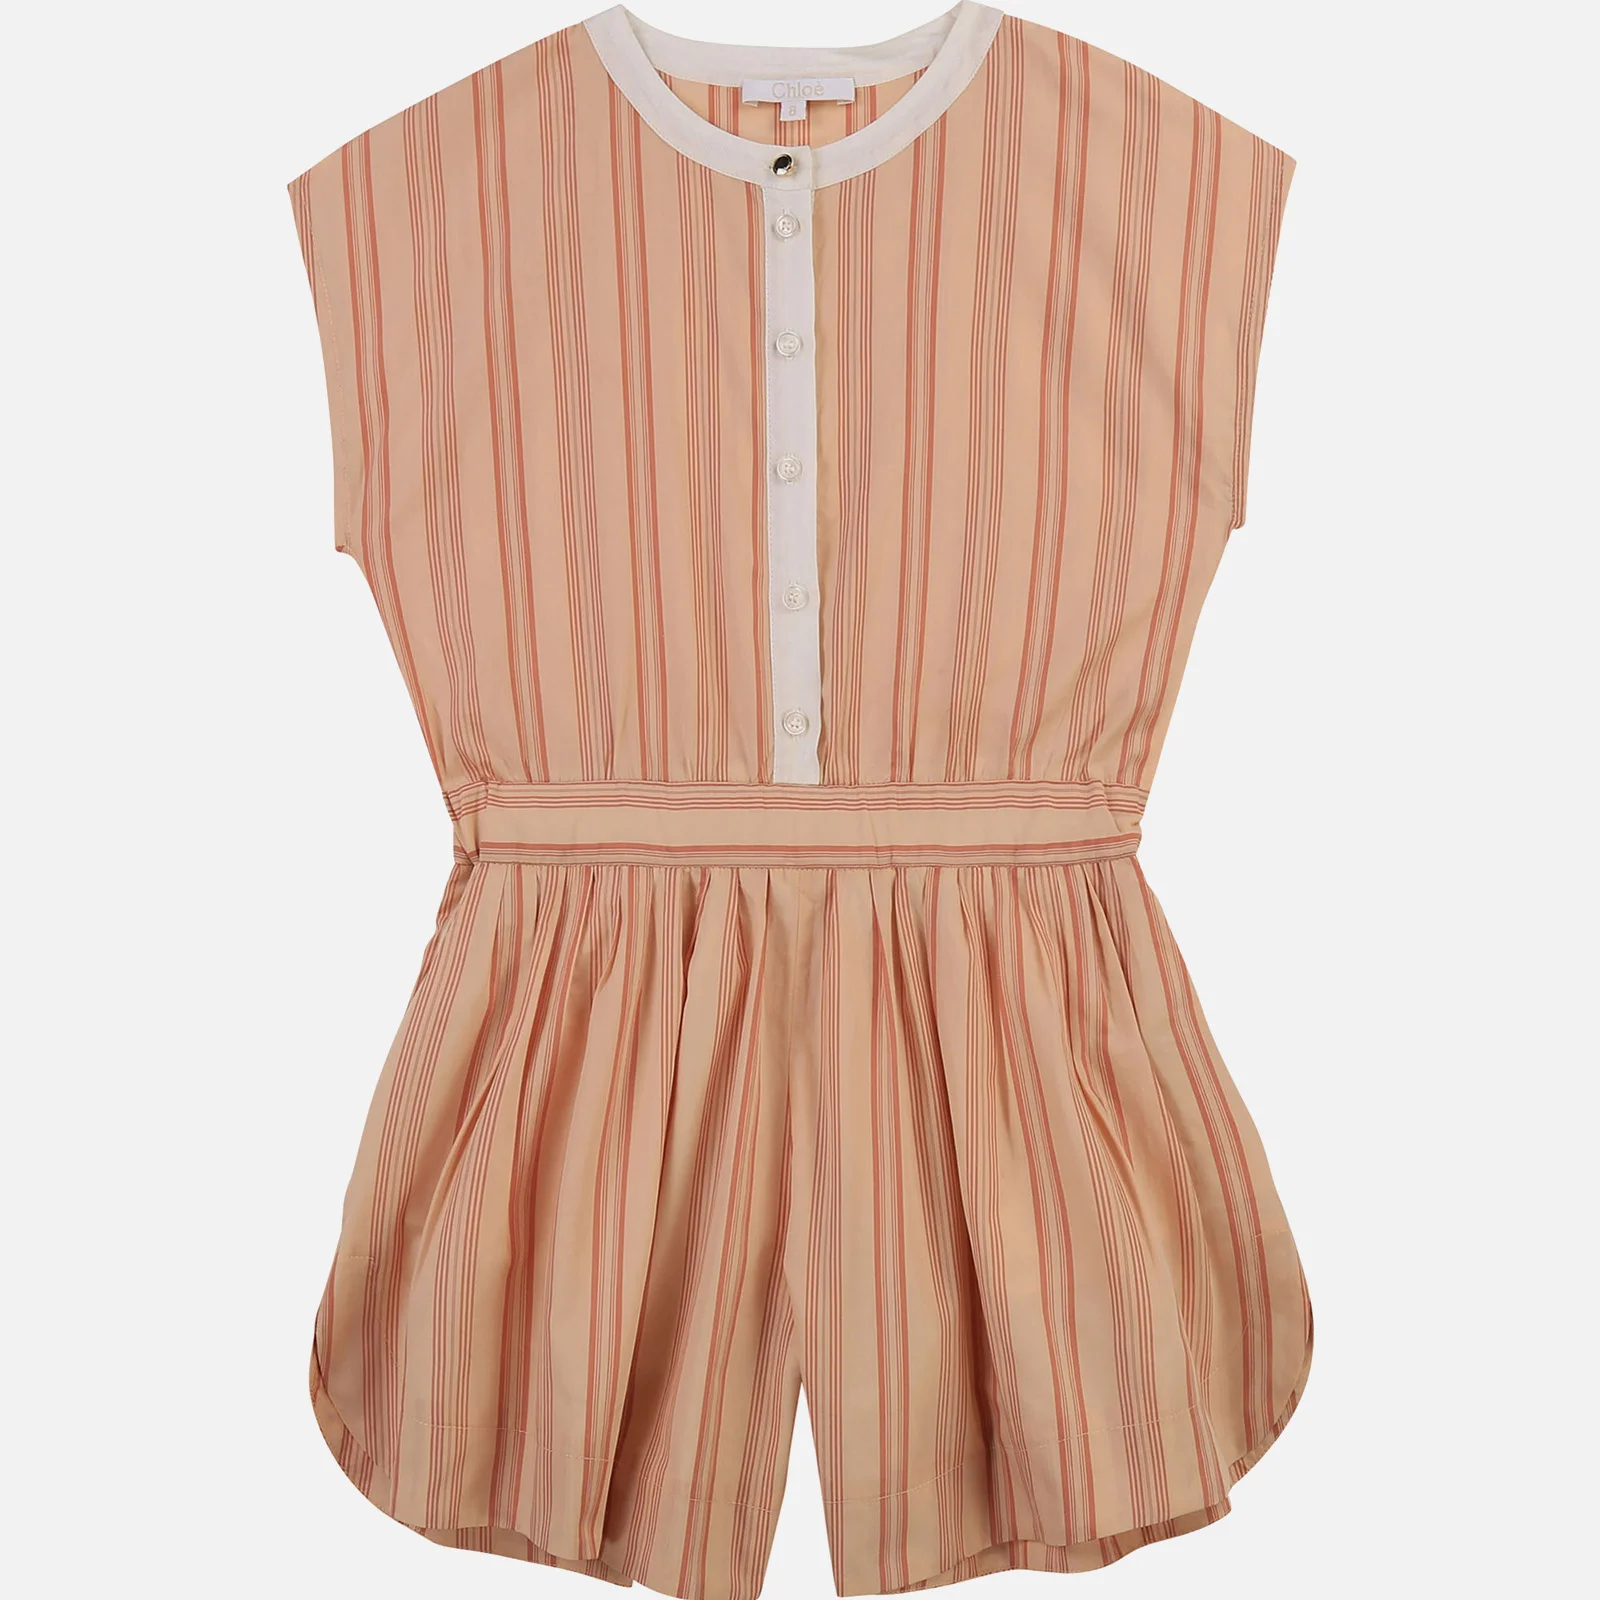 Chloe Girls' All In One Playsuit - Nude Image 1